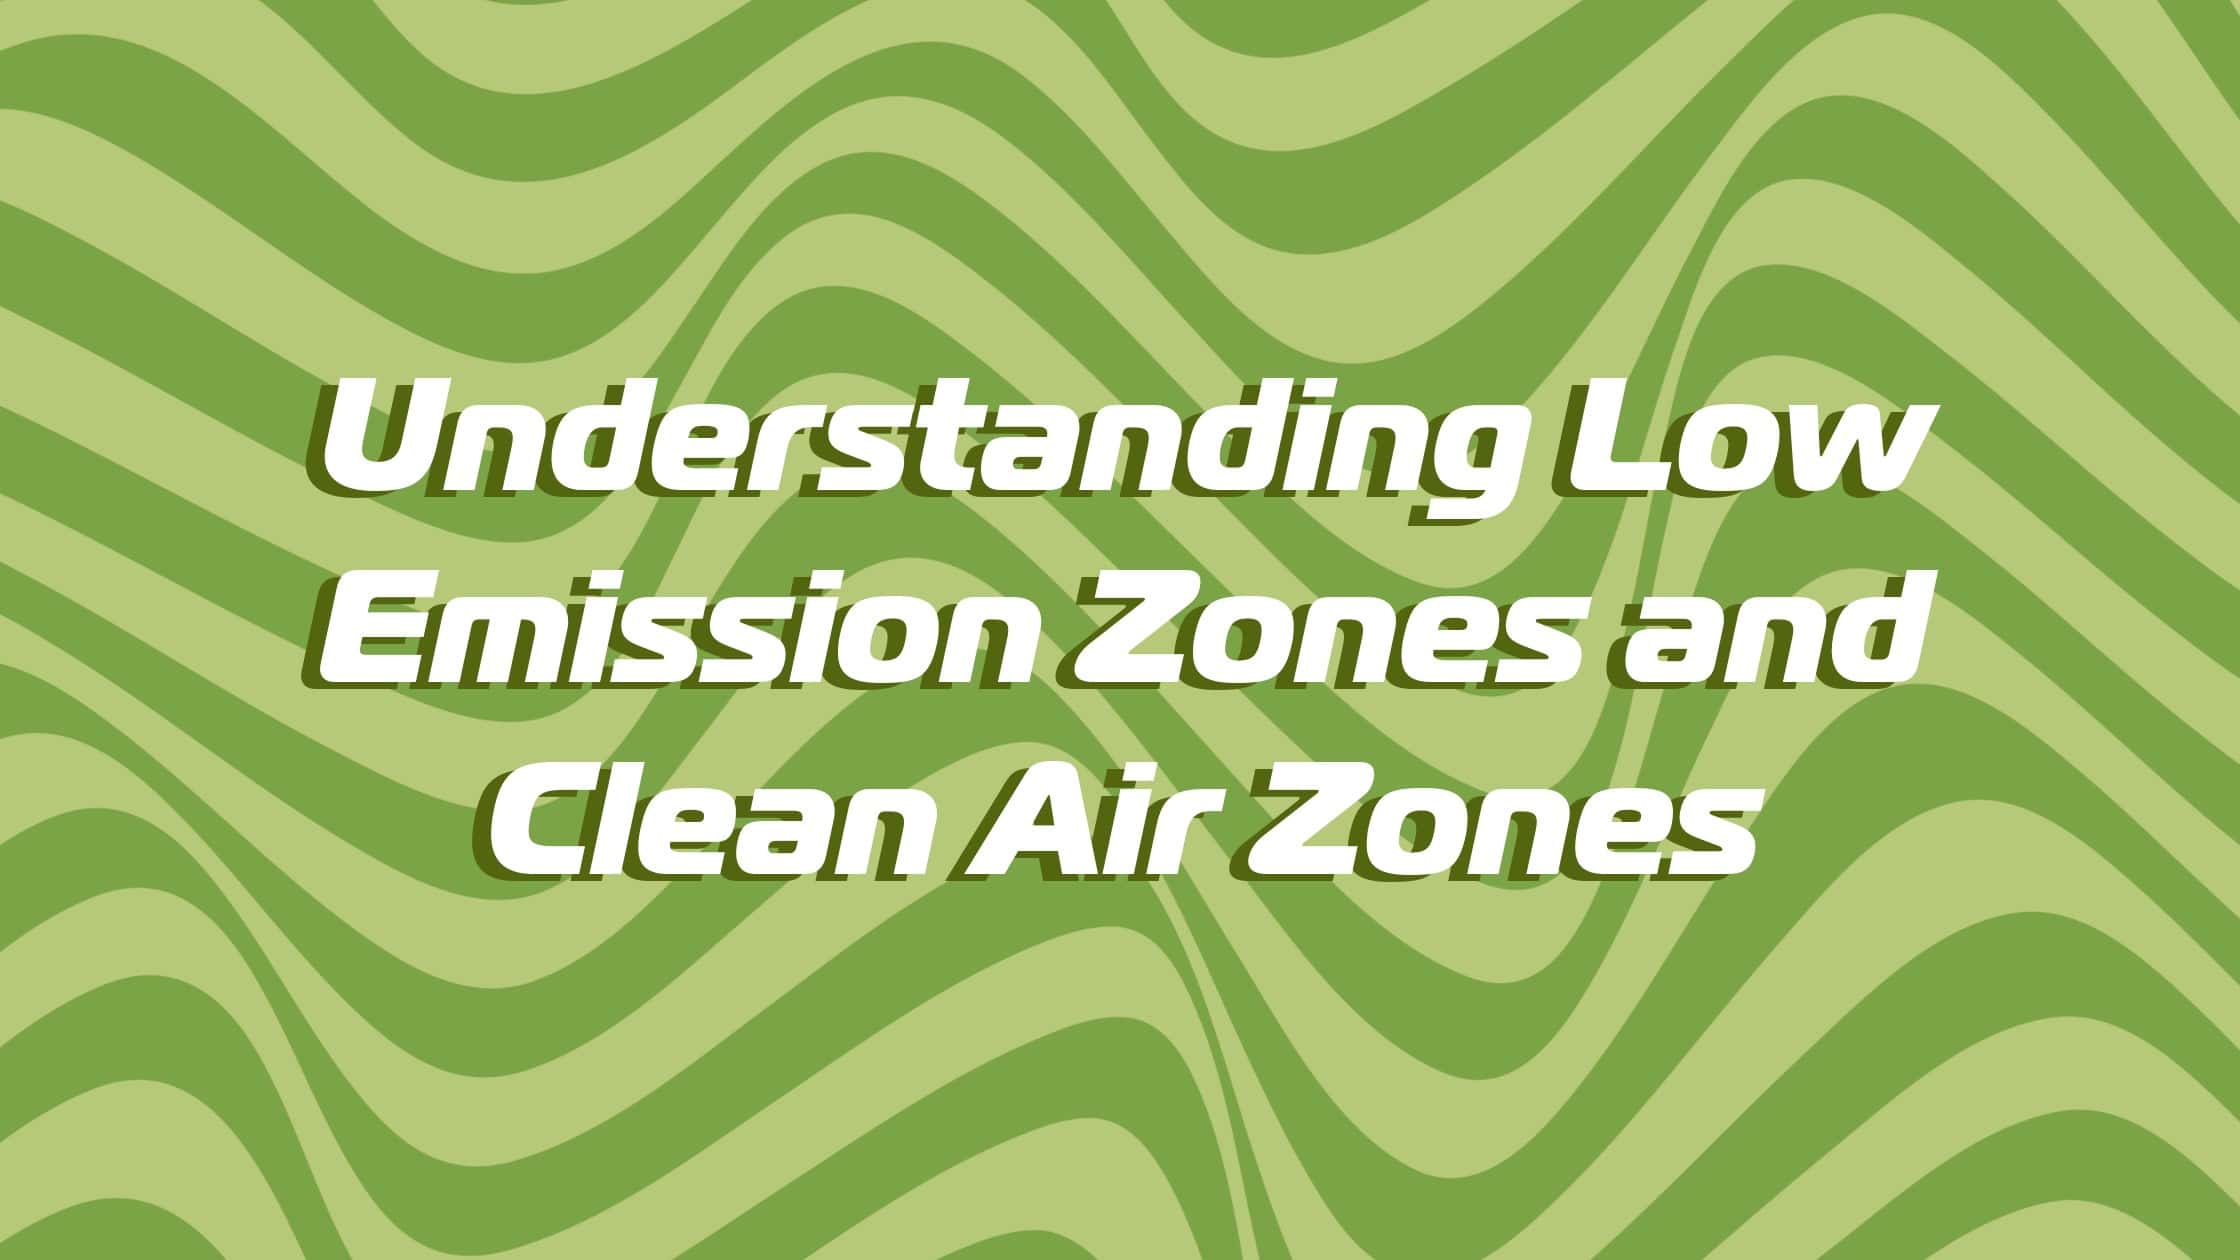 understanding low emission zones and clean air zones